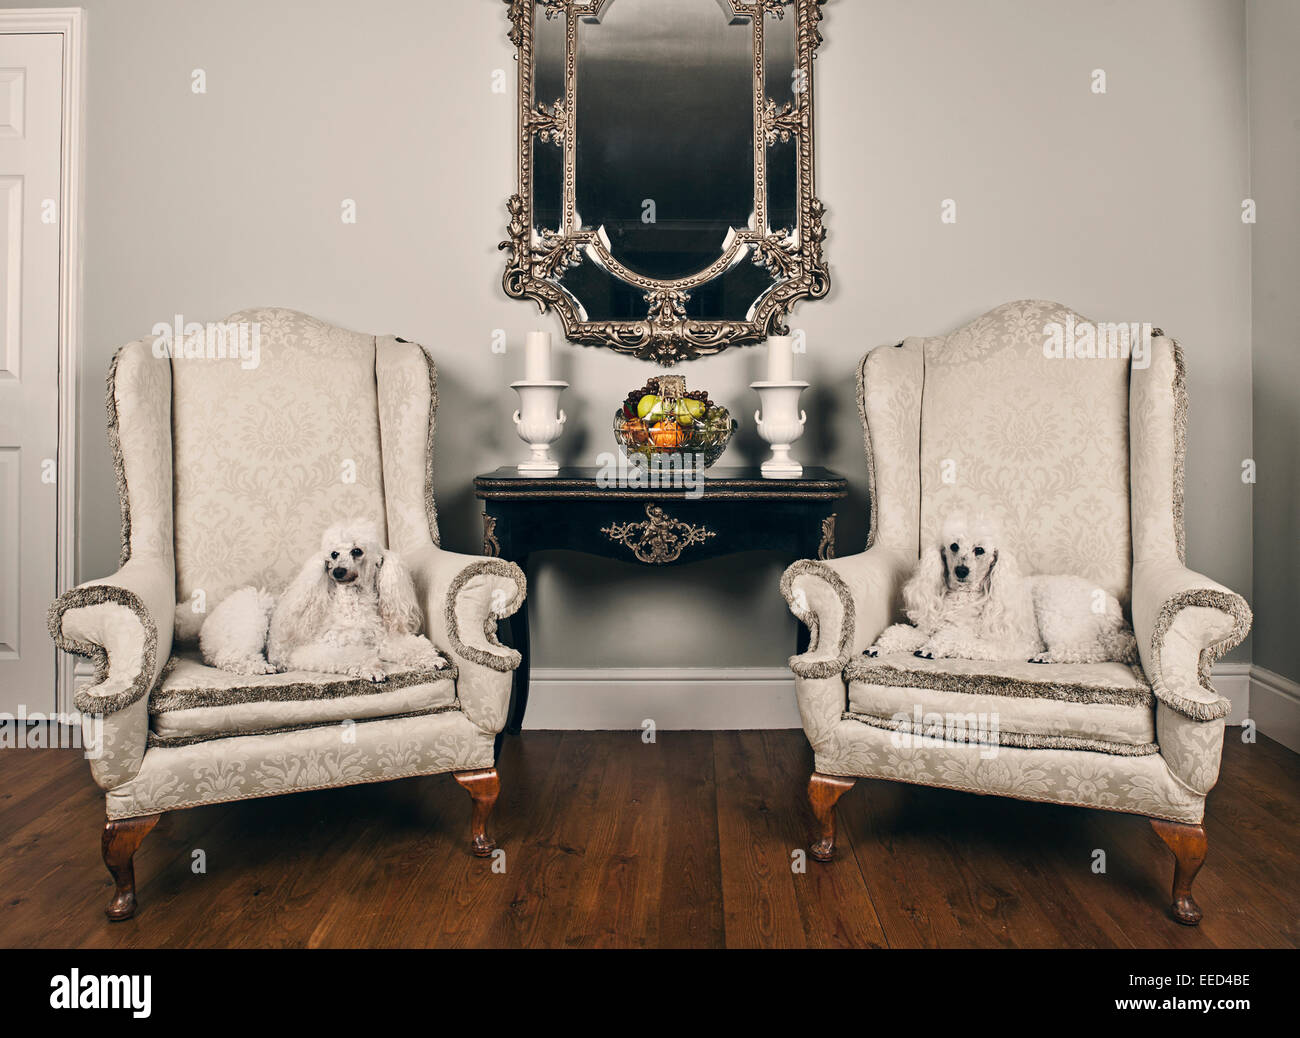 Poodles sitting on Armchair in Posh Room Stock Photo